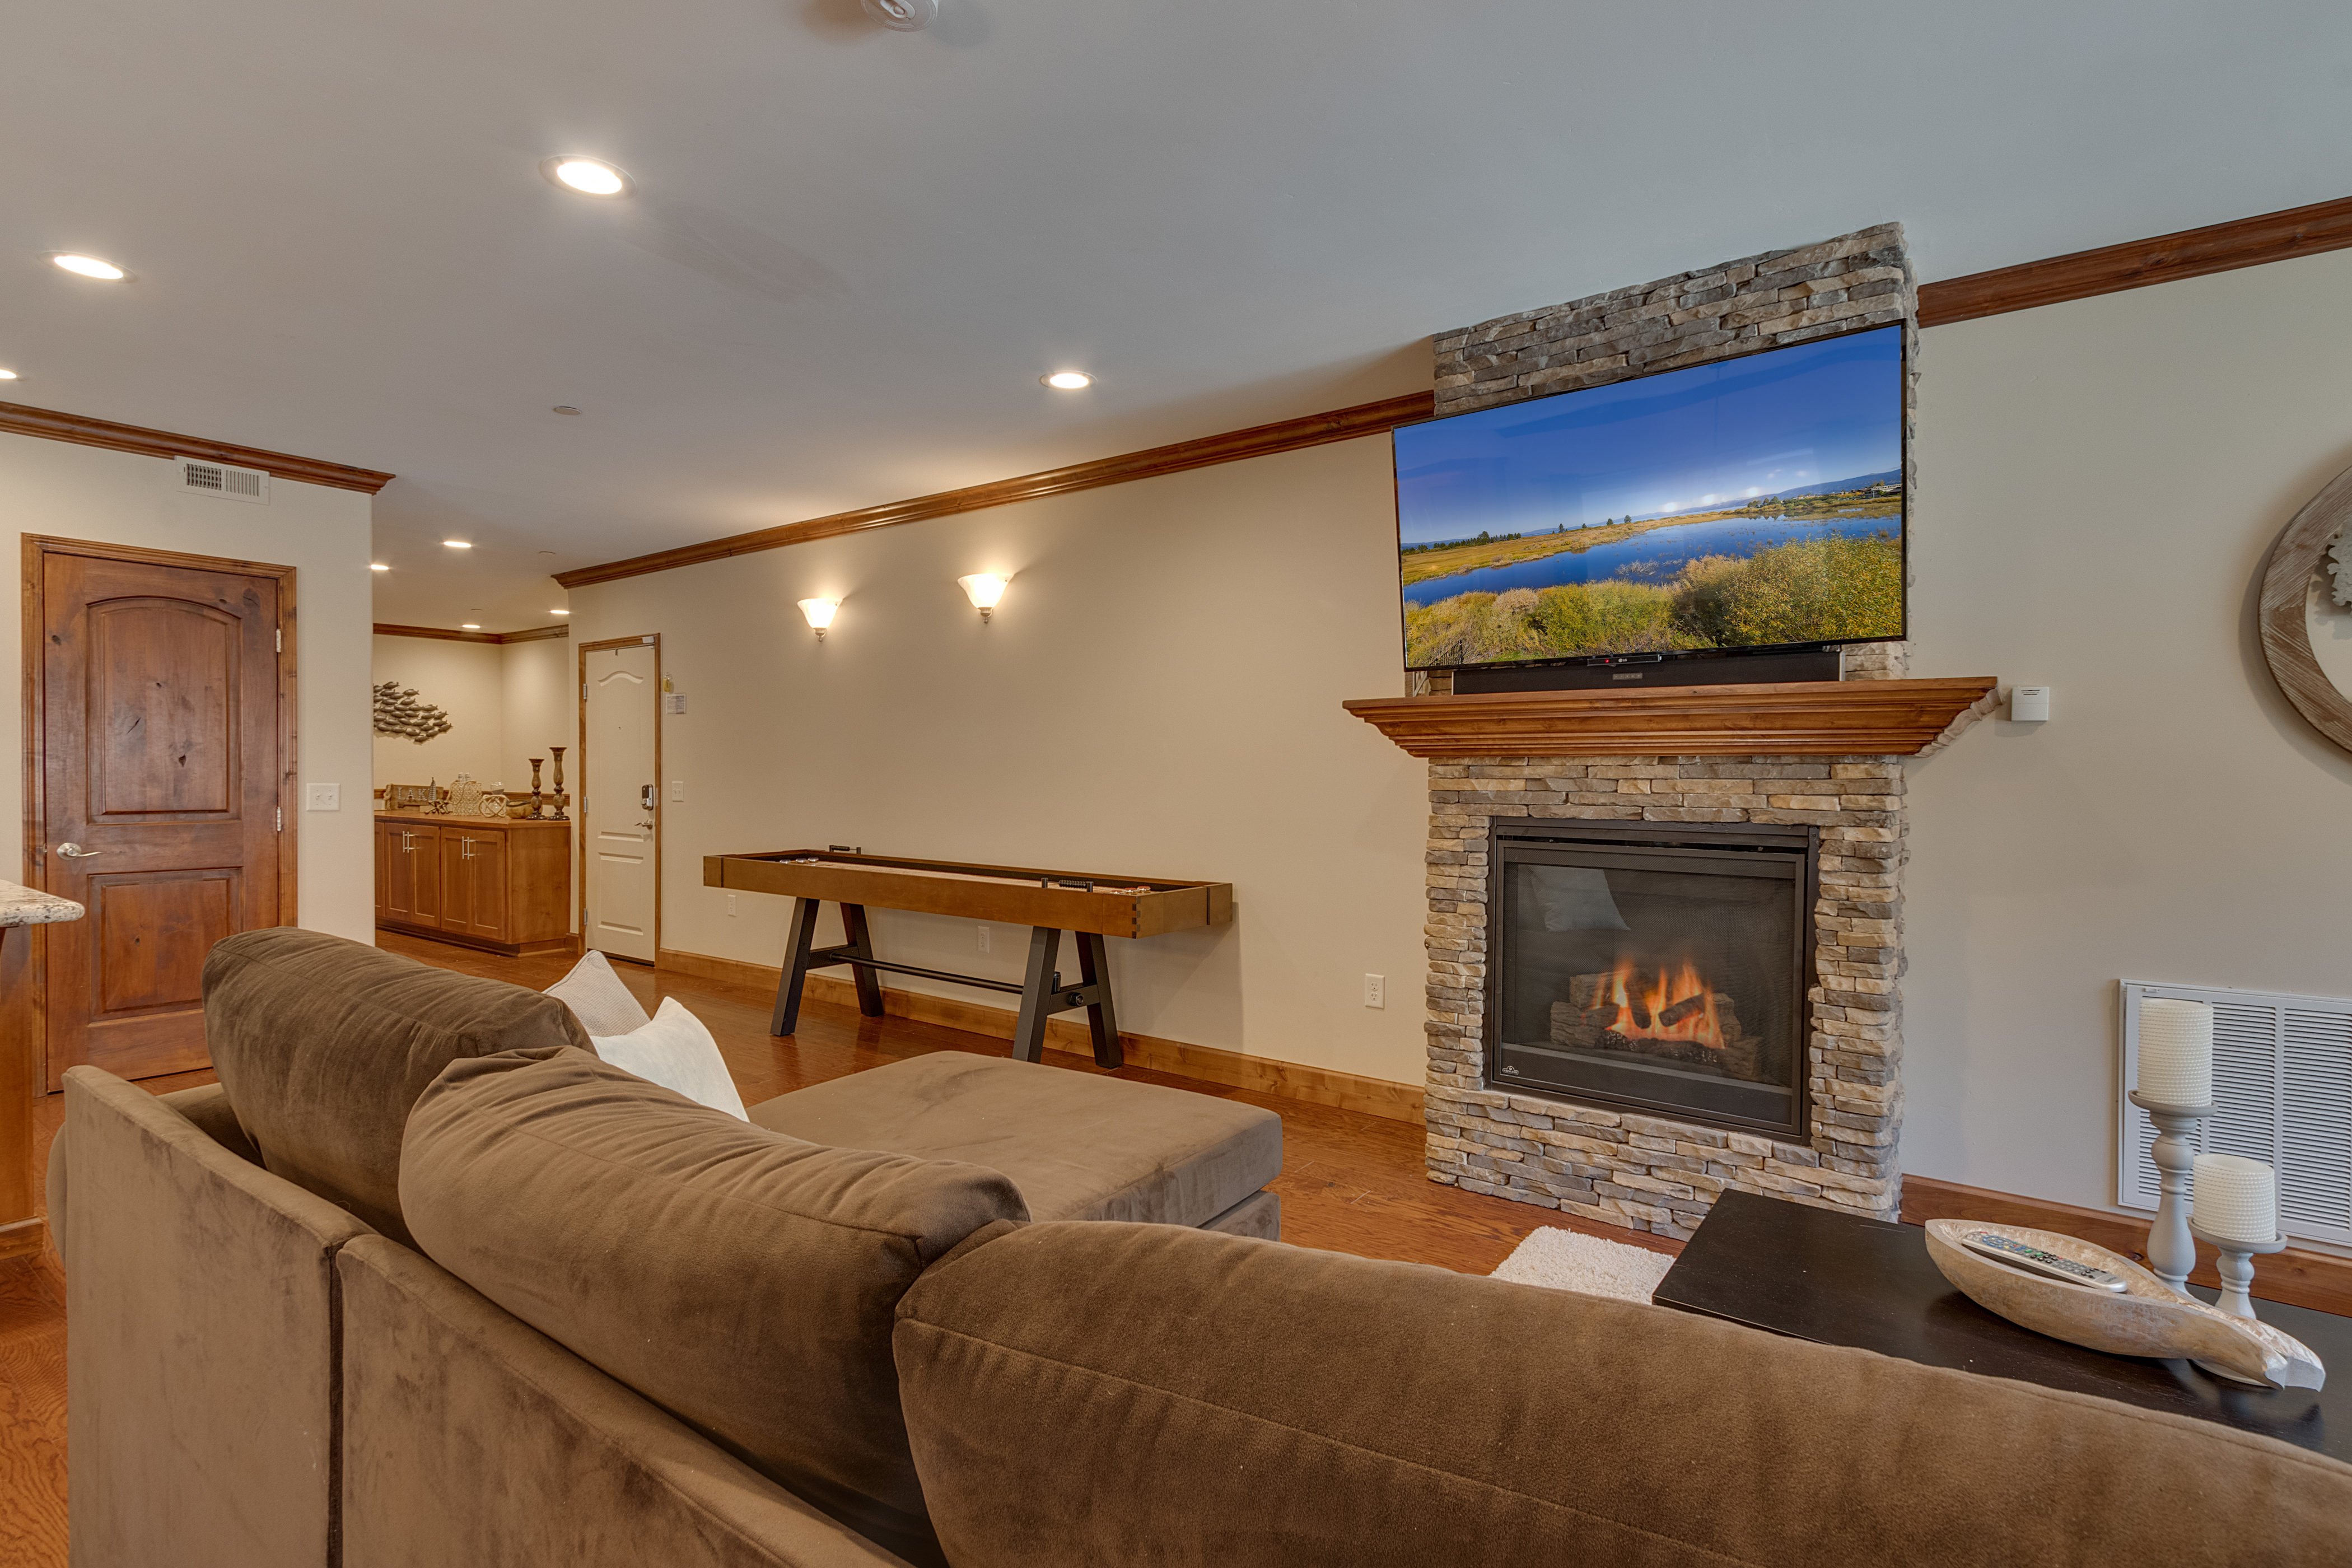 Living area with fireplace, flat screen tv, and shuffleboard